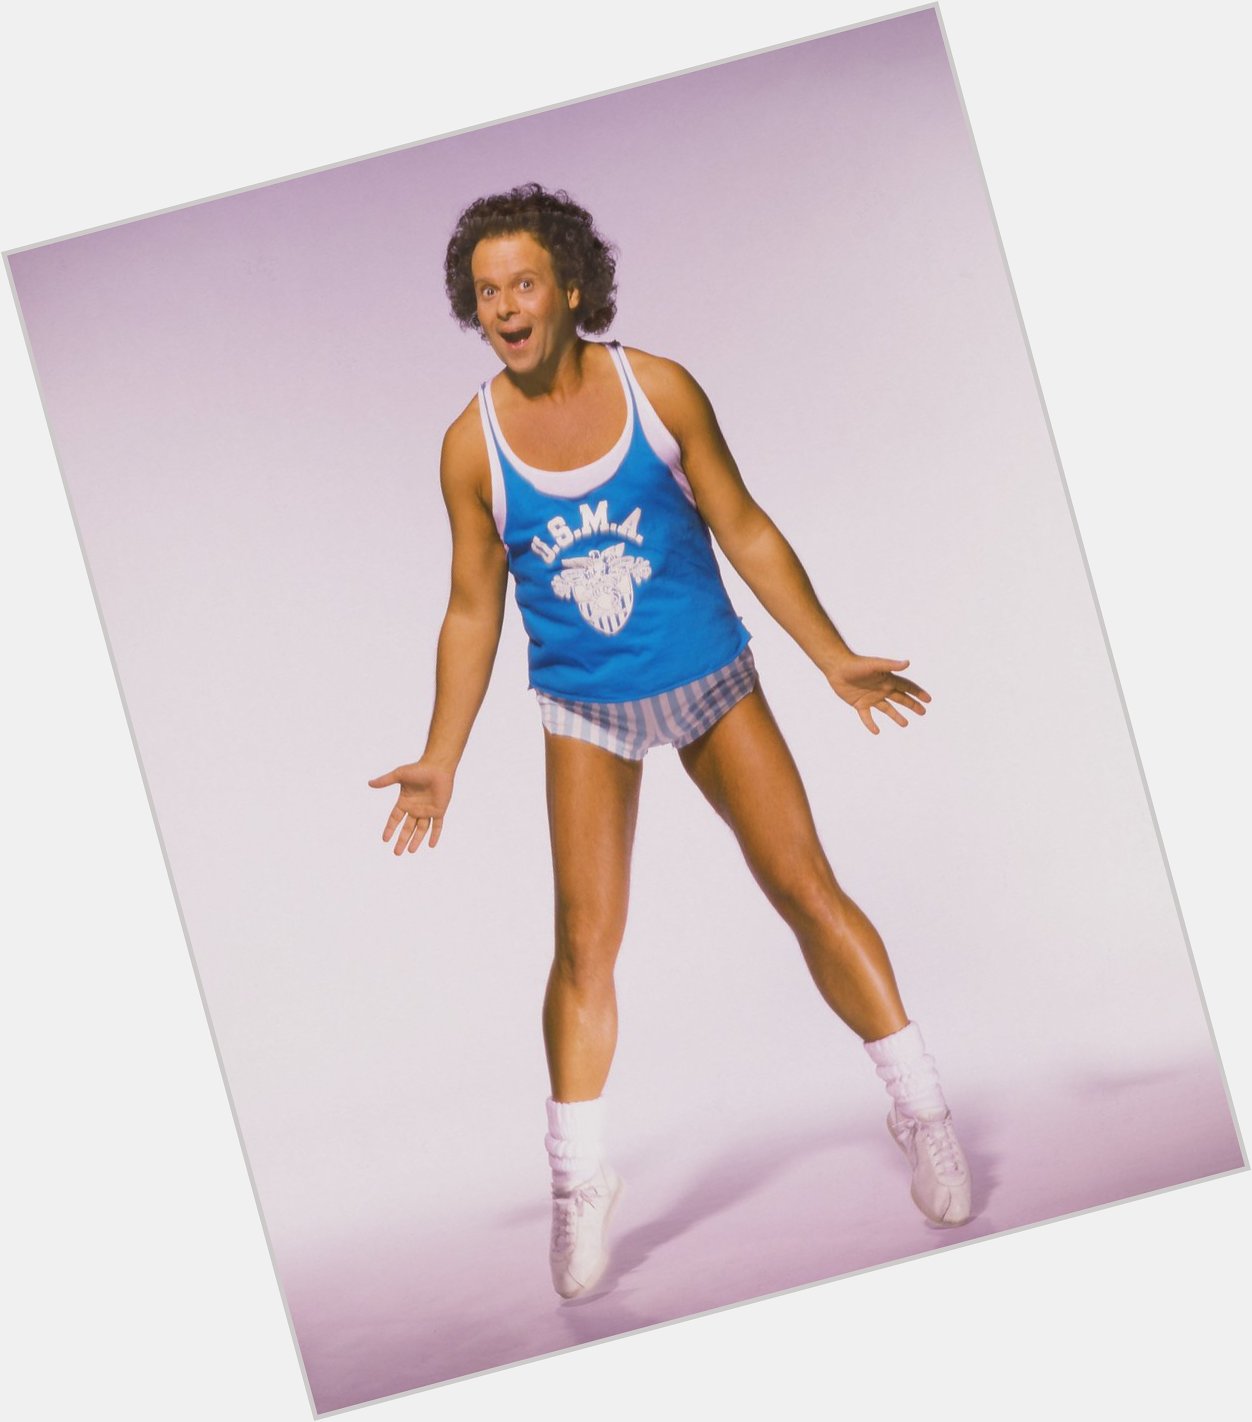 Happy Birthday to Richard Simmons who turns 69 today! 